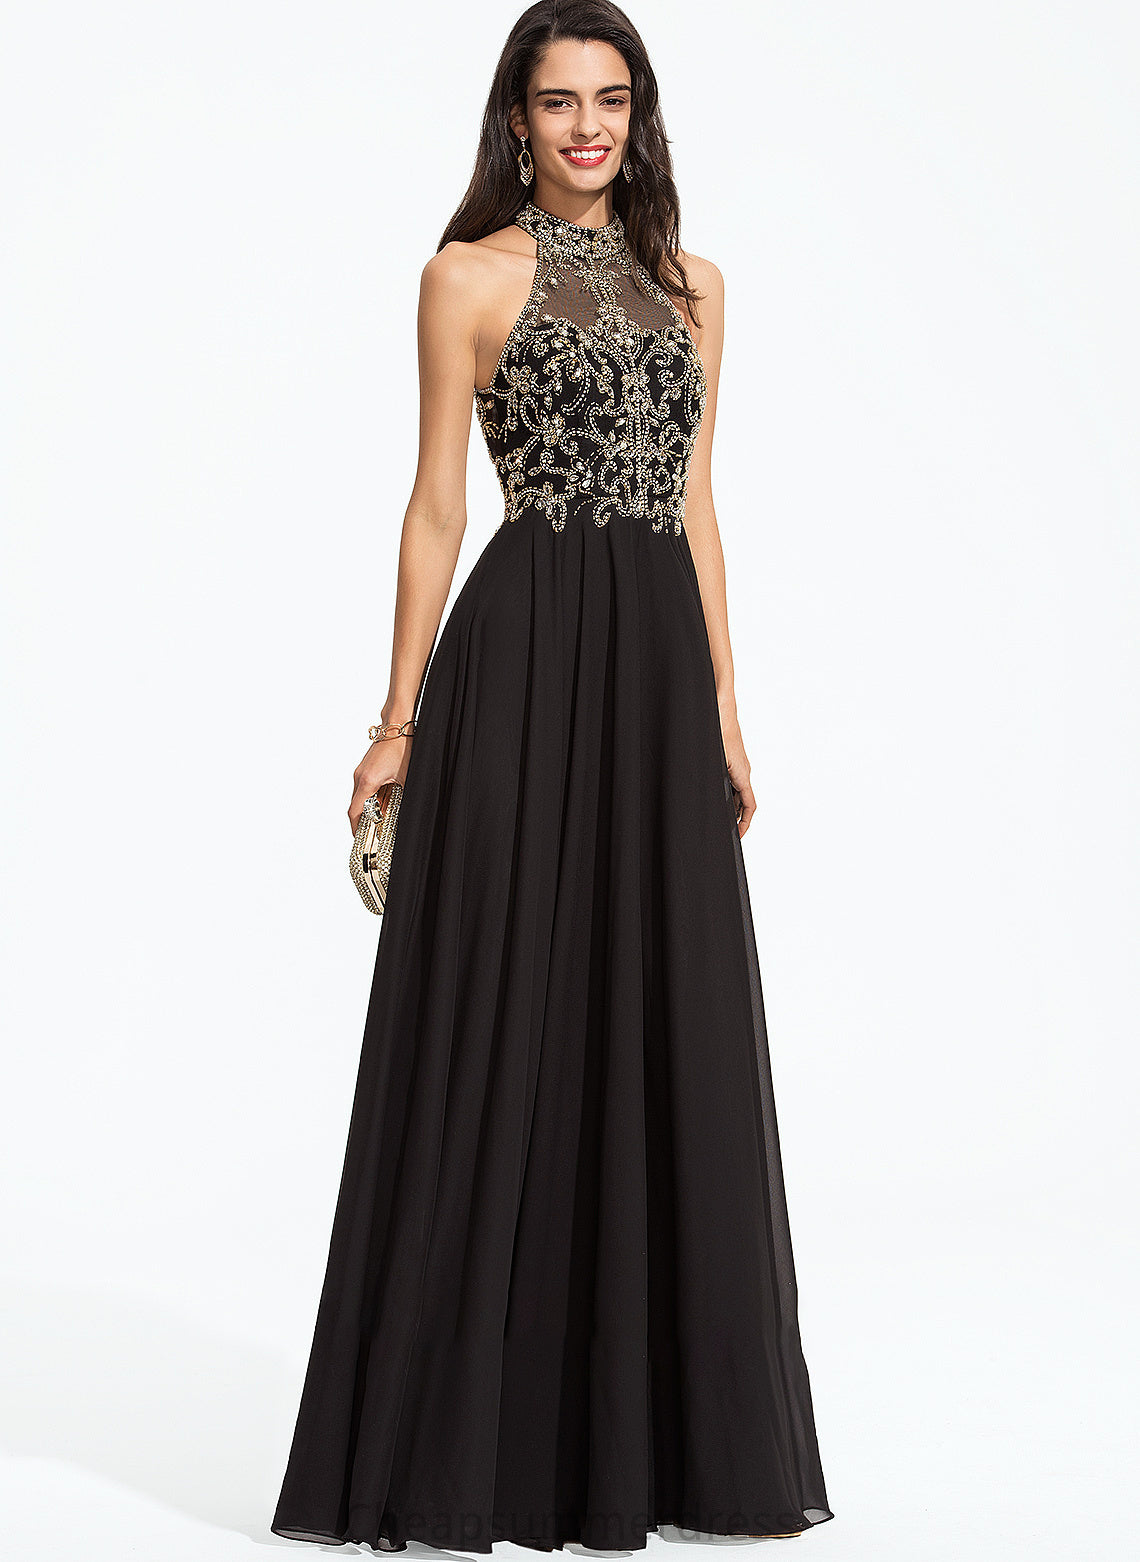 Chiffon High Neck Floor-Length A-Line Prom Dresses Sequins Beading Zoie With